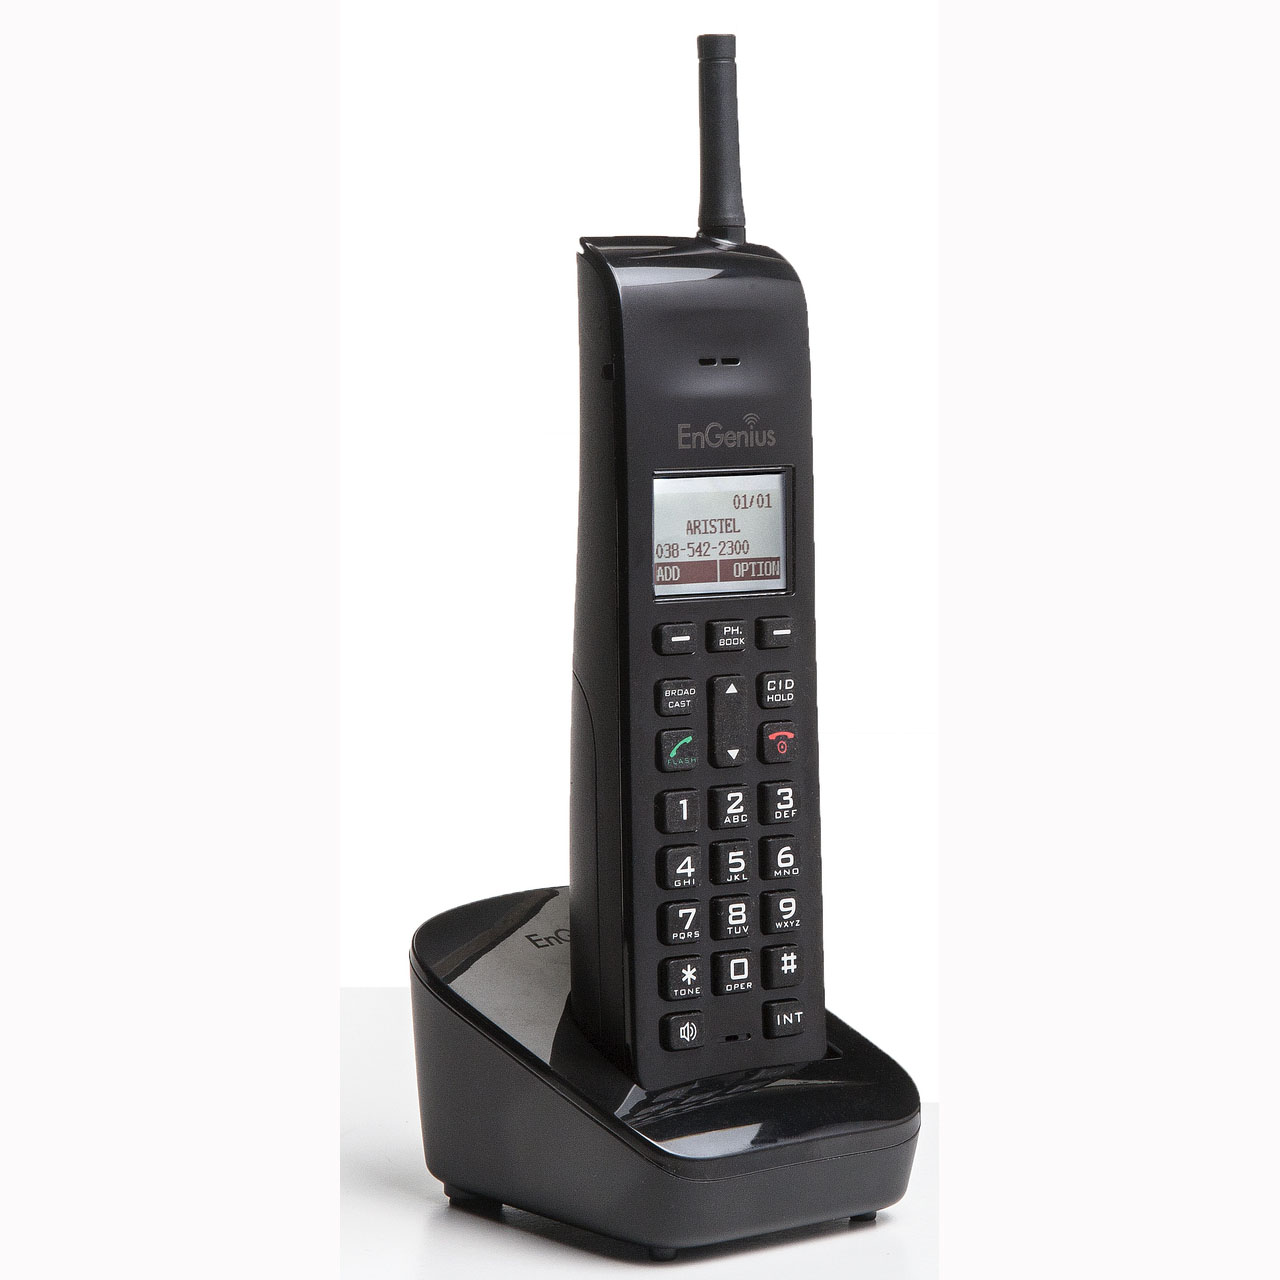 SN933HC Handset and Charger